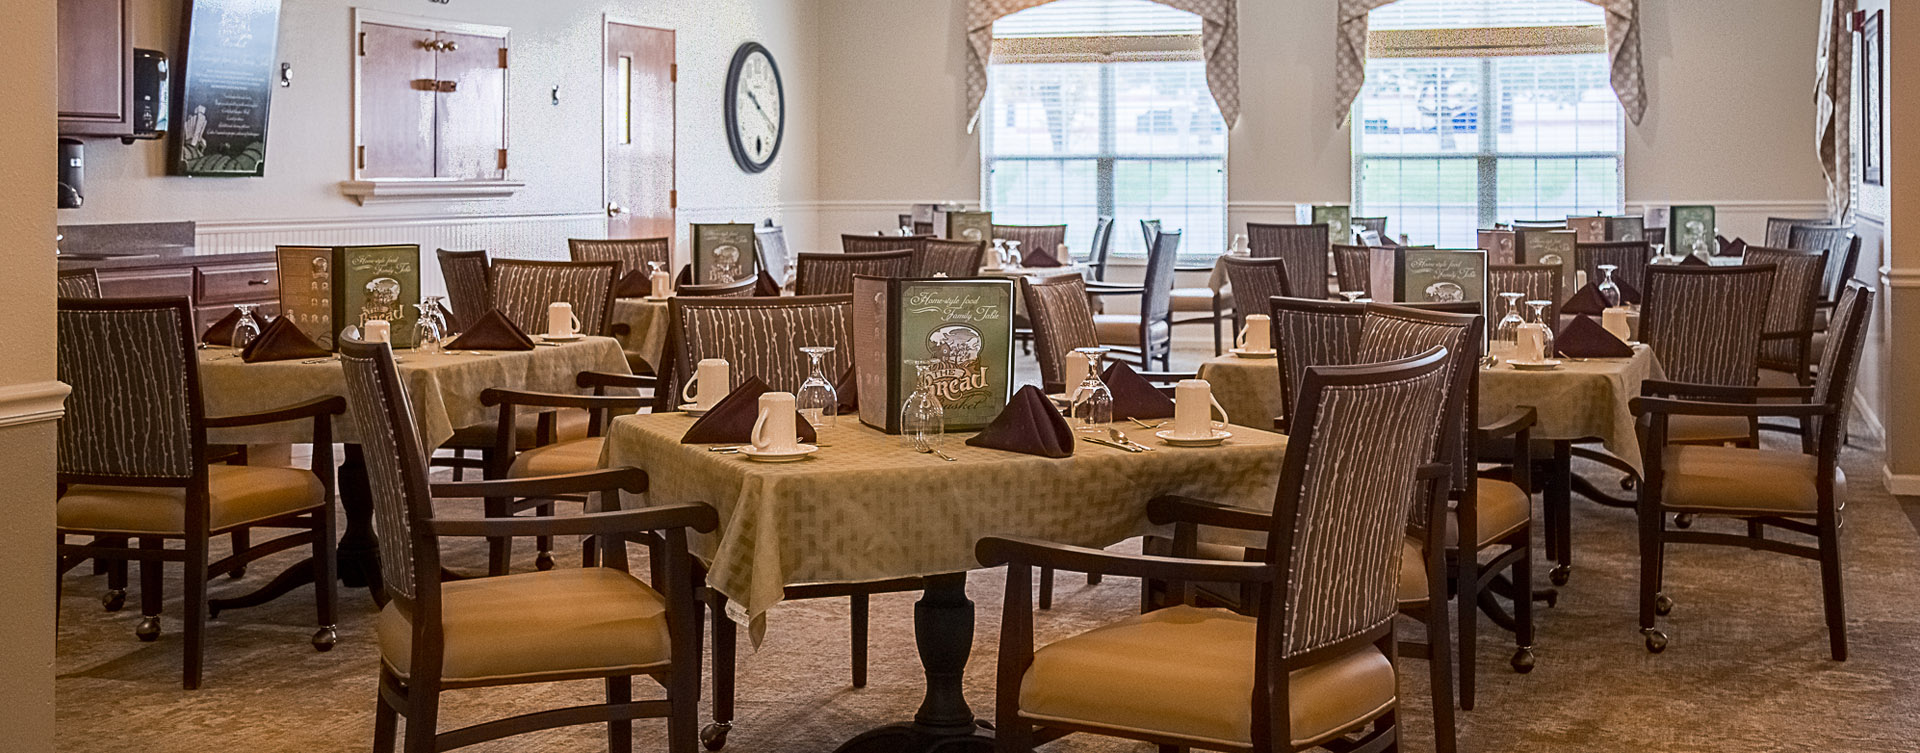 Food is best when shared with friends in the dining room at Bickford of Davenport